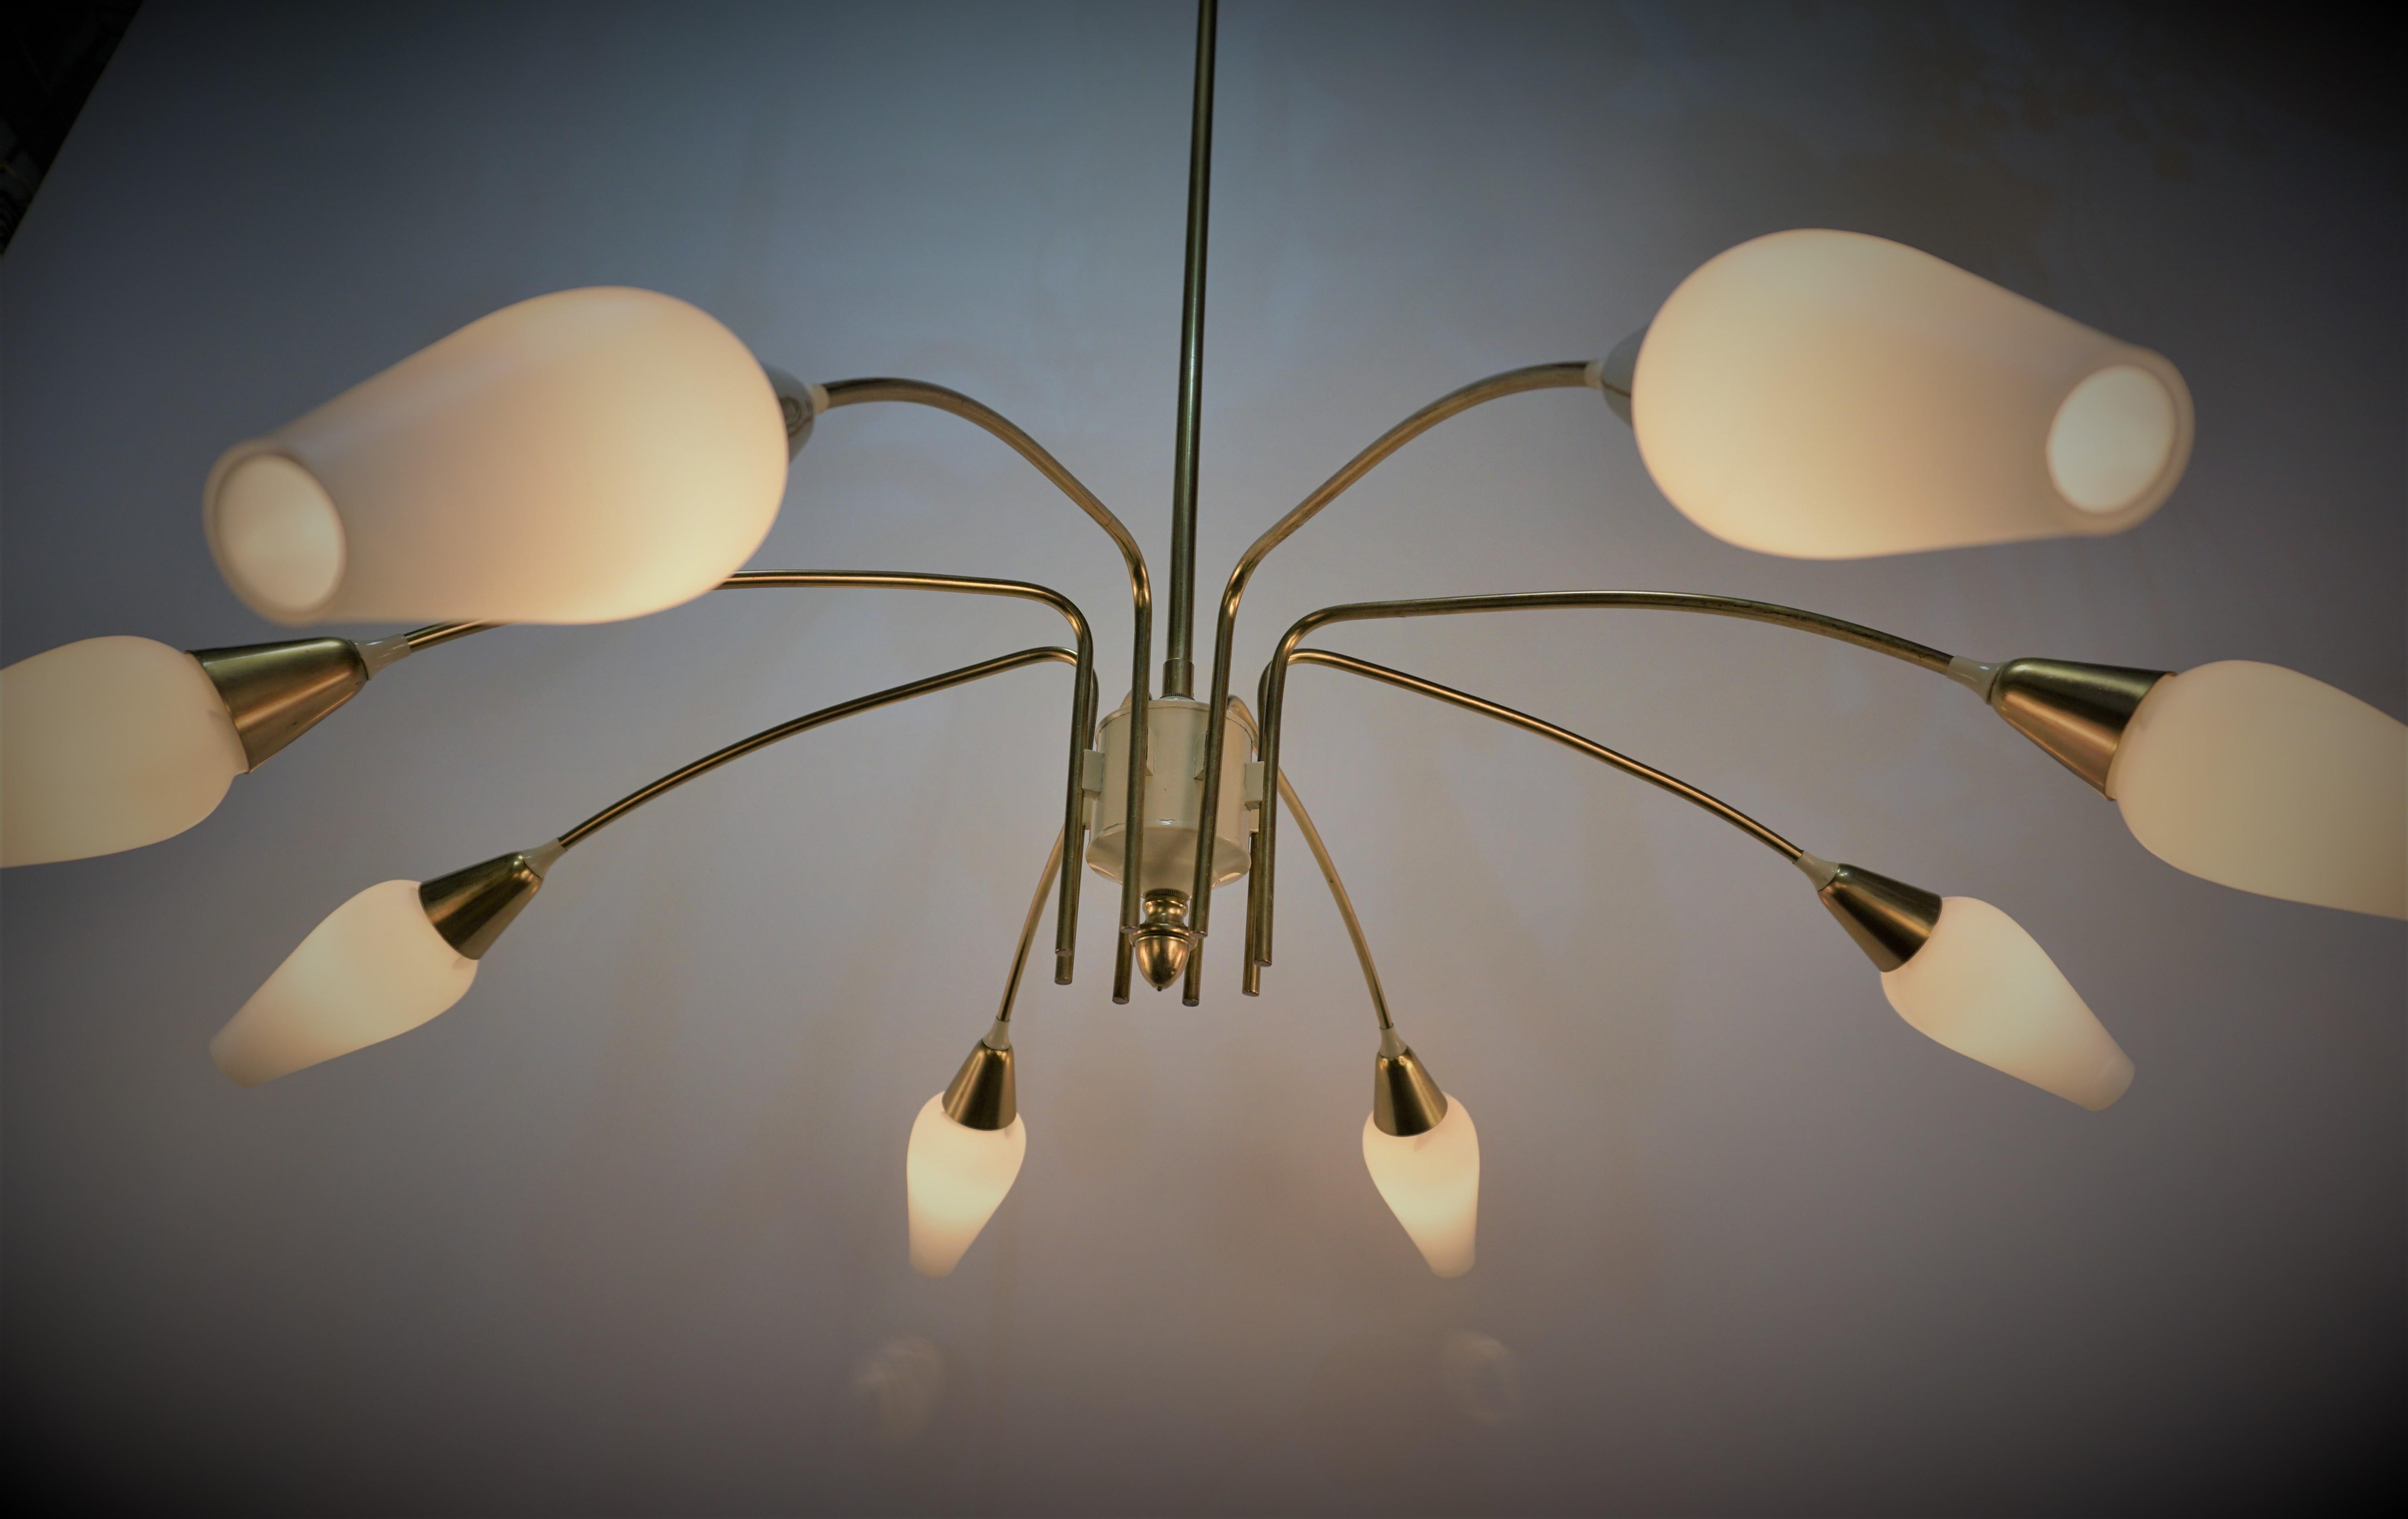  French Arlus Mid-Century 1950's Chandelier In Good Condition For Sale In Fairfax, VA